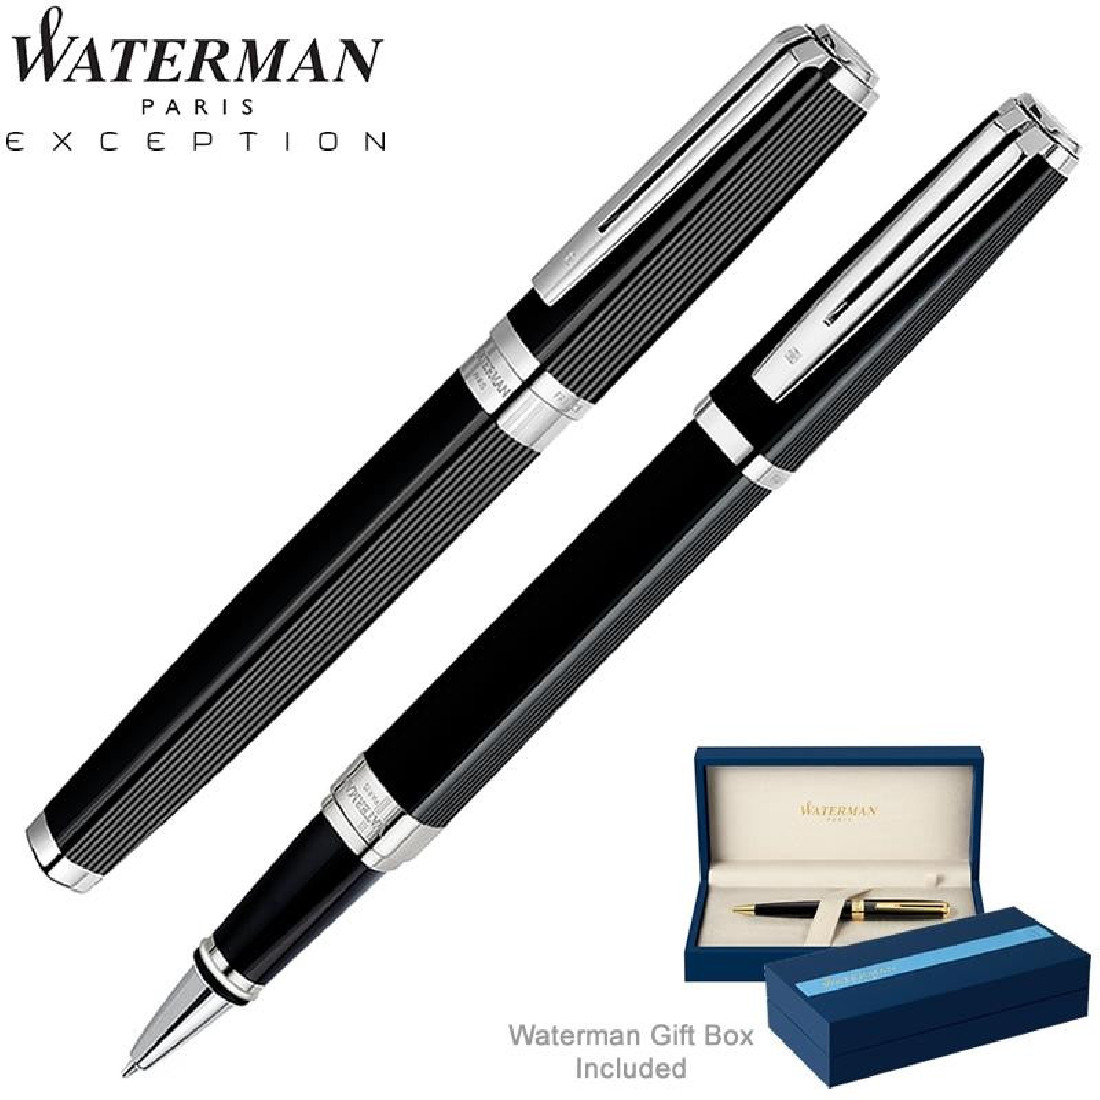 WATERMAN EXCEPTION NIGHT & DAY BLACK ST ROLLERBALL S0636860